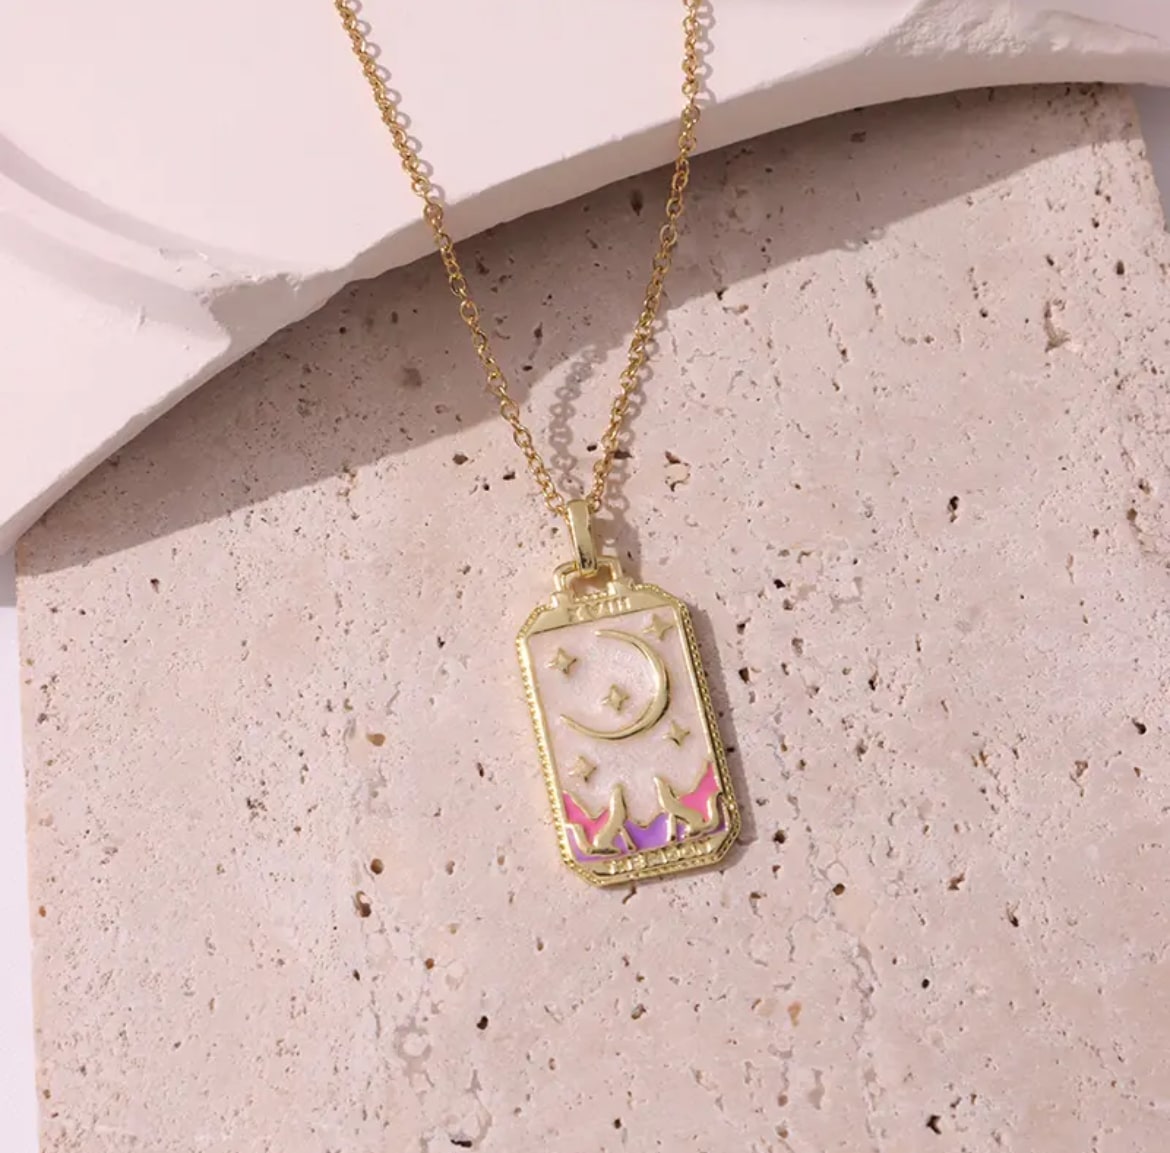 Elegant pink tarot card charm necklace, perfect for spiritual seekers.